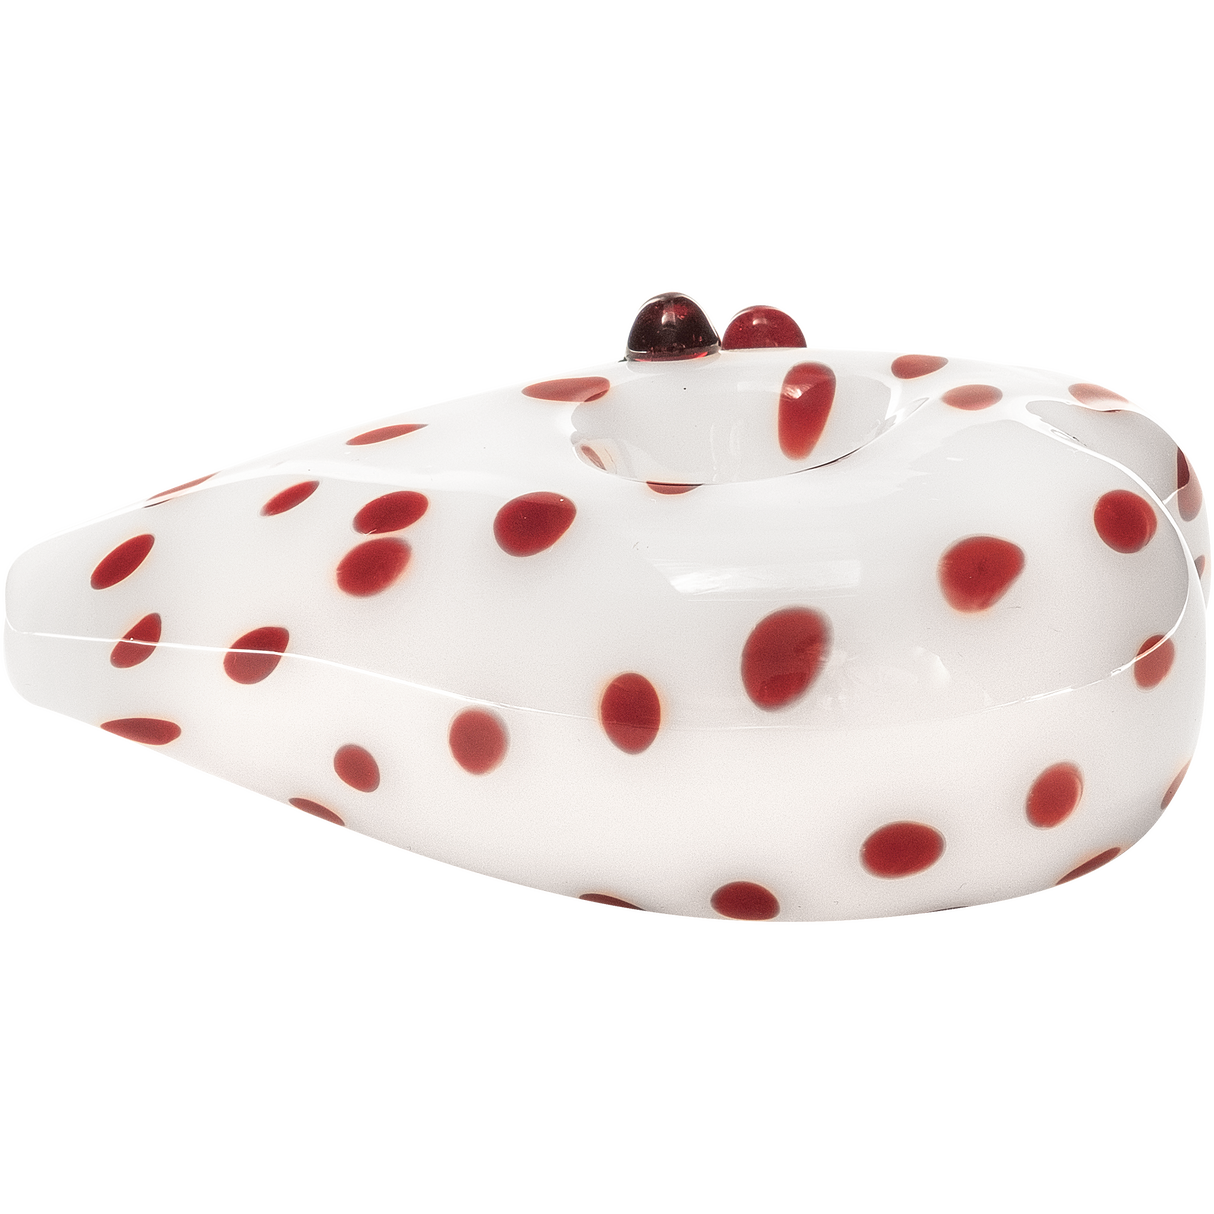 LA Pipes White Heart-Shaped Hand Pipe with Red Dots, Borosilicate Glass, Top View